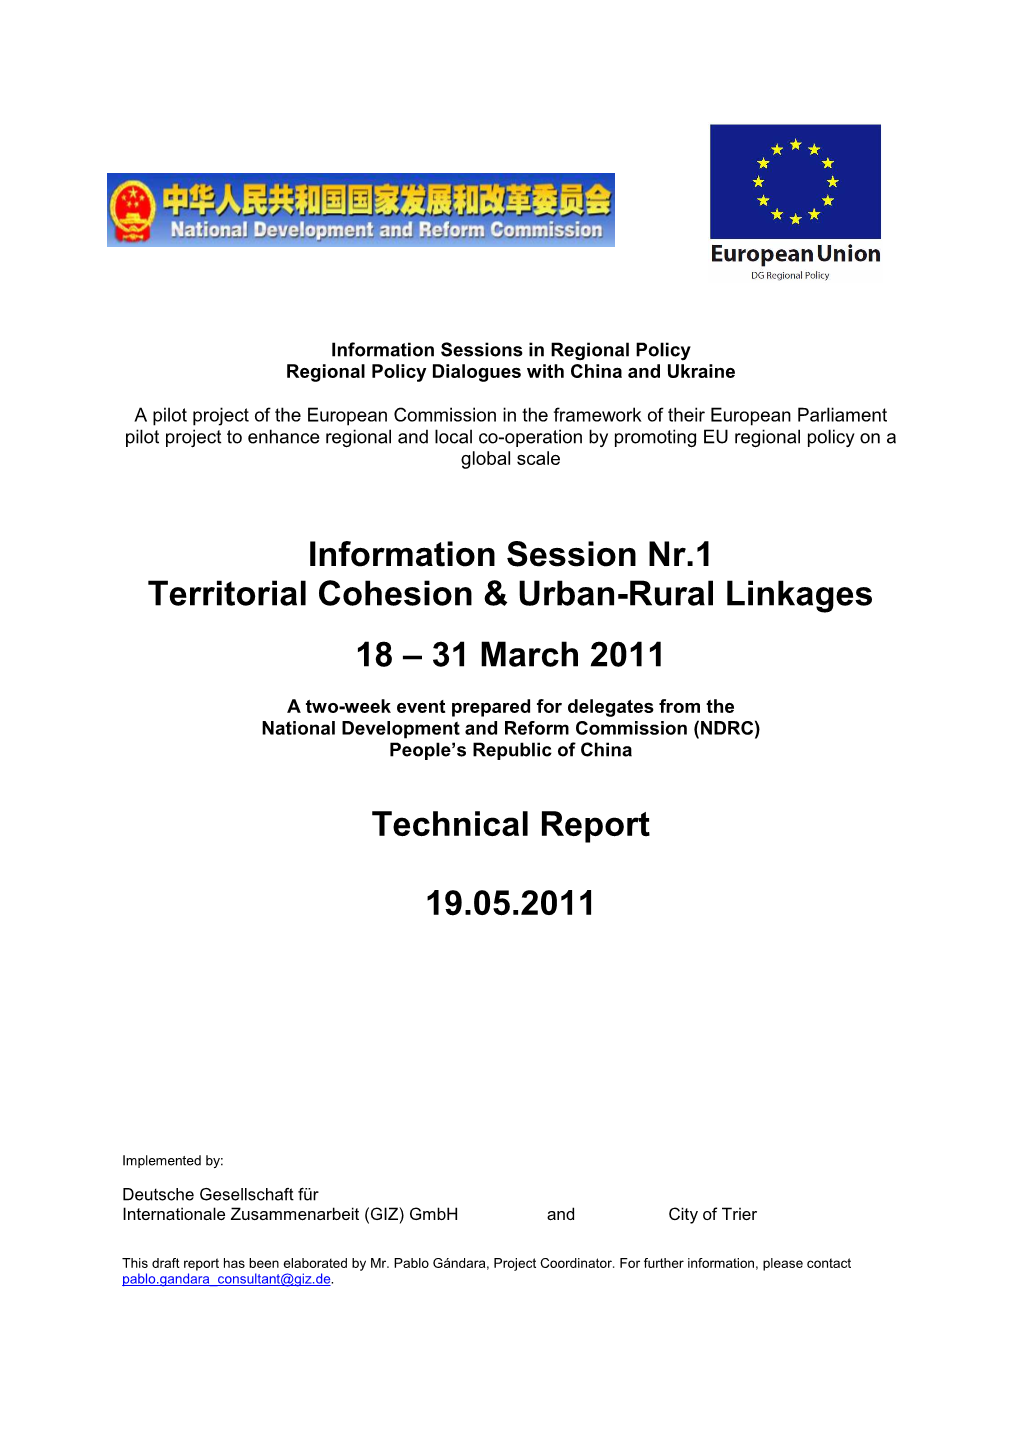 Information Session Nr.1 Territorial Cohesion & Urban-Rural Linkages 18